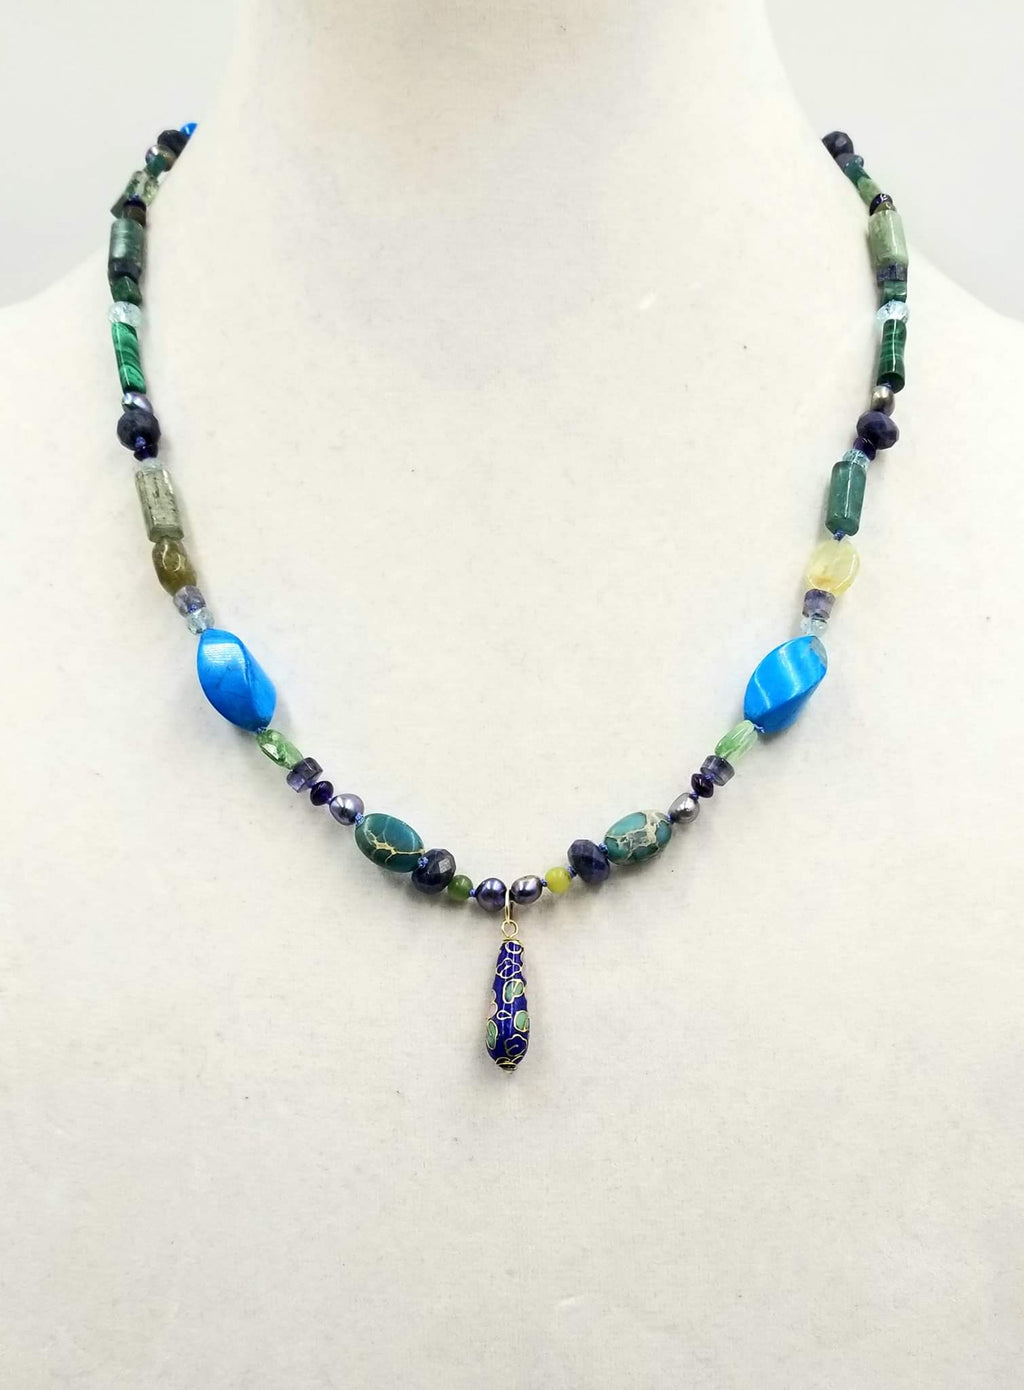 14K yellow gold, colorful multi-stone necklace with kyanite cloisonne pendant. 20-21.5" length. See list of stones below.